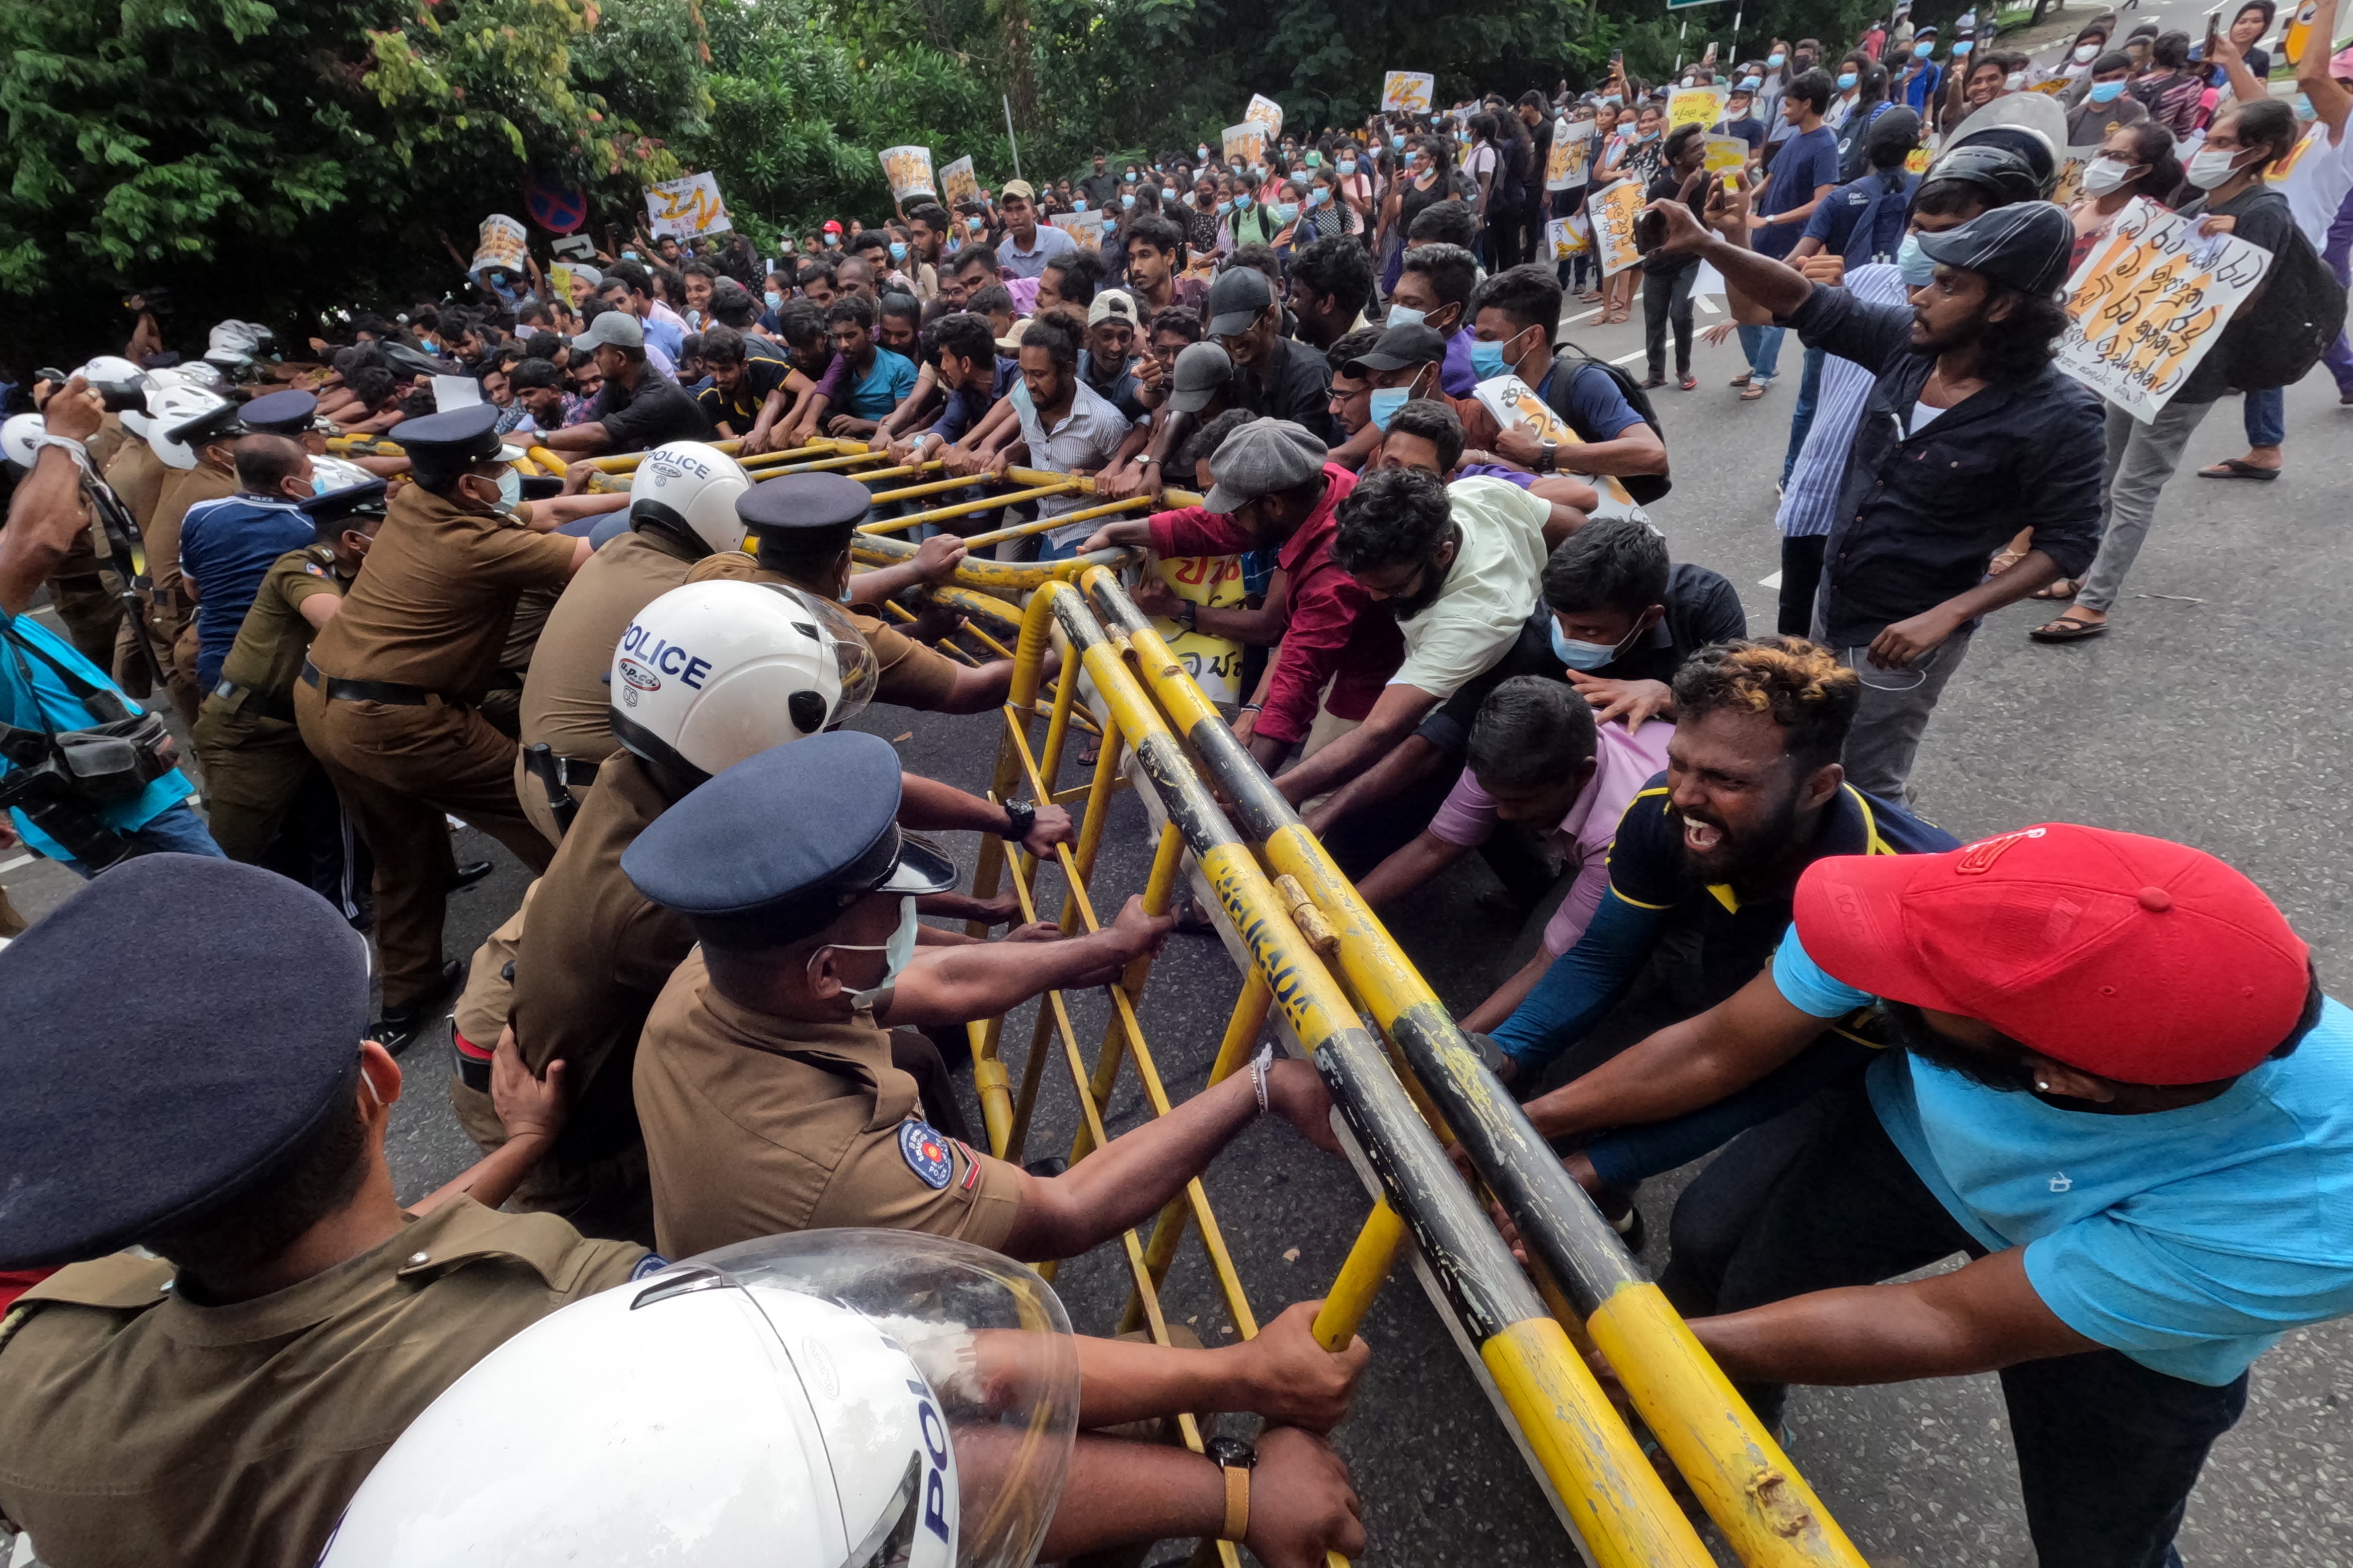 Explainer: What has led to the violence and protests in Sri Lanka?